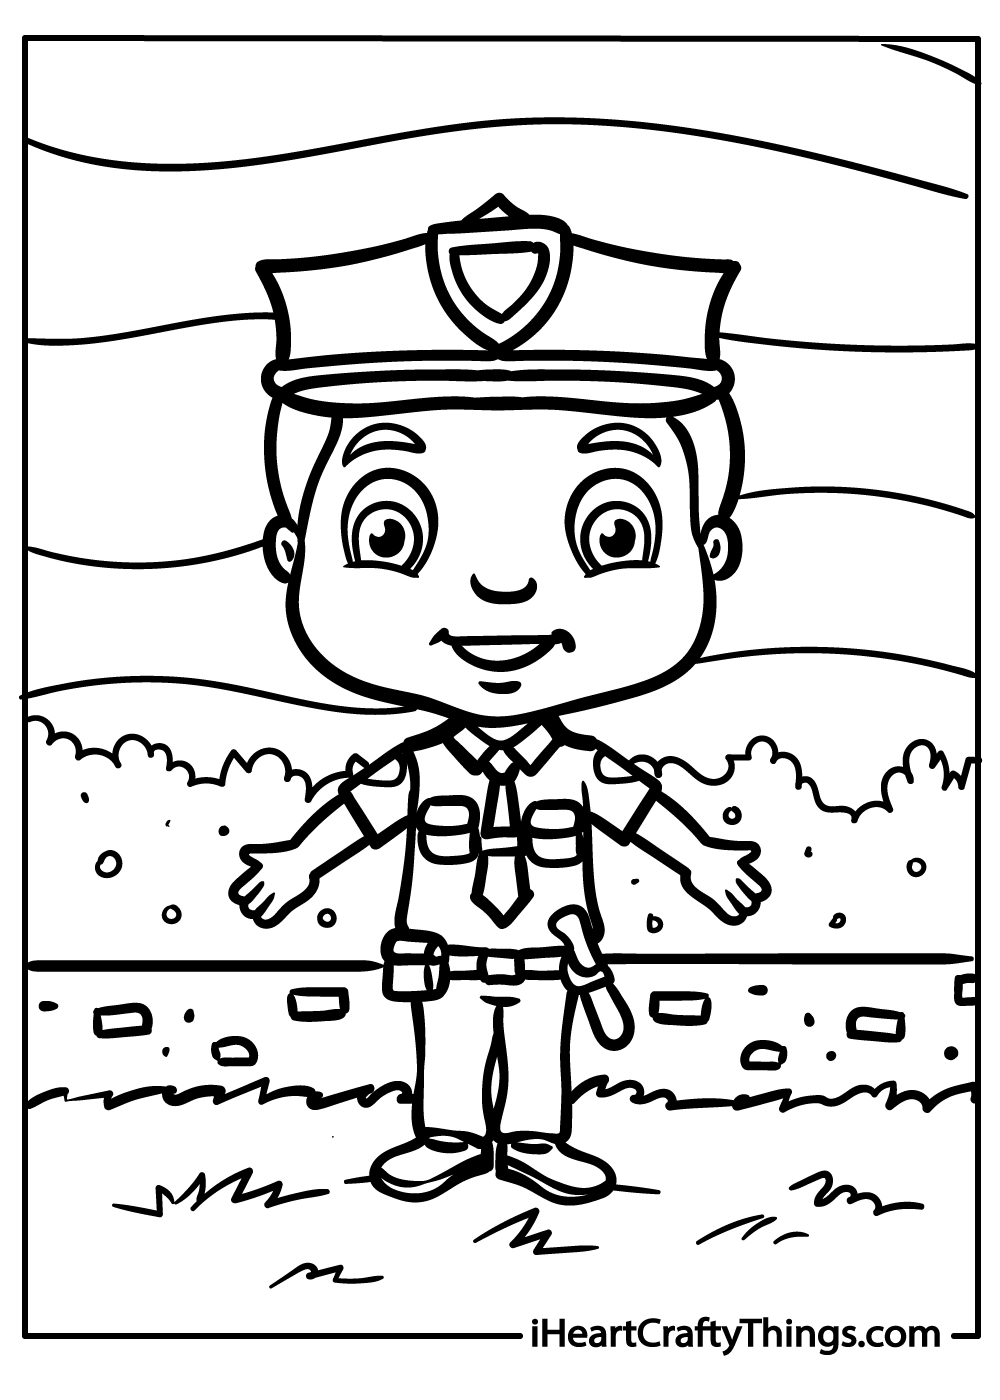 25+ Coloring Pages Of Police Officers